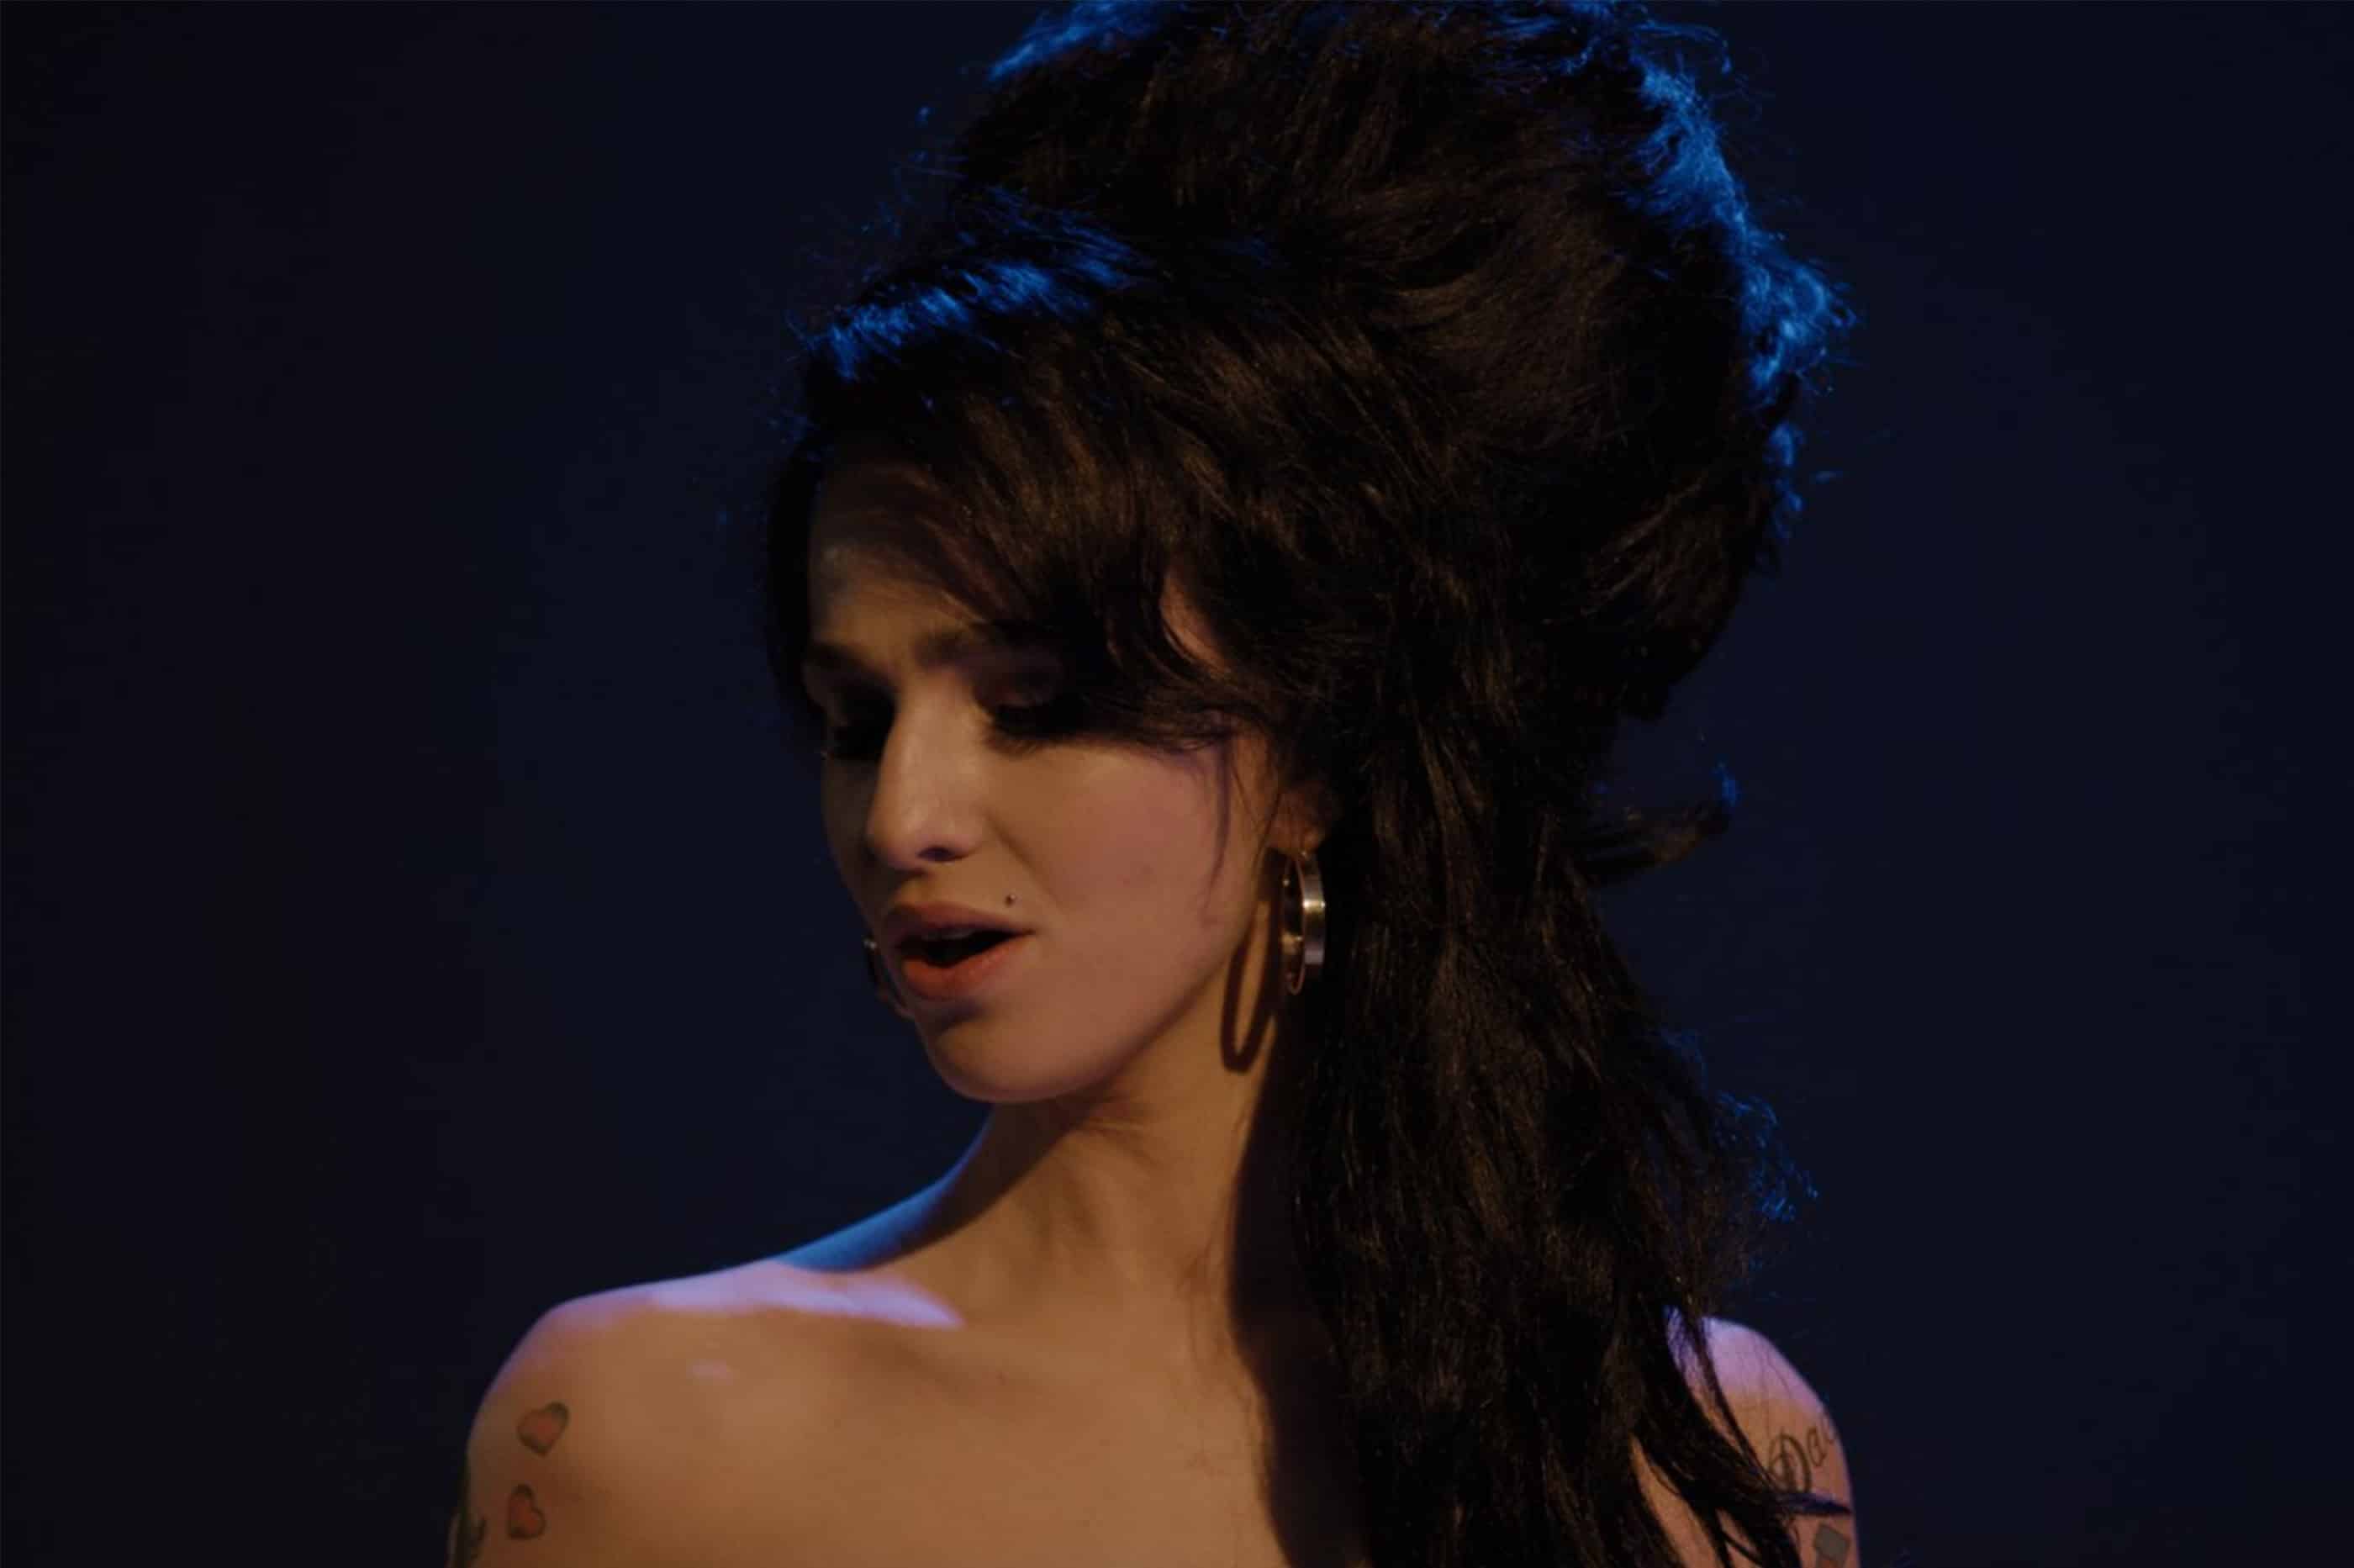 We have our first look at the Amy Winehouse biopic 'Back to Black'